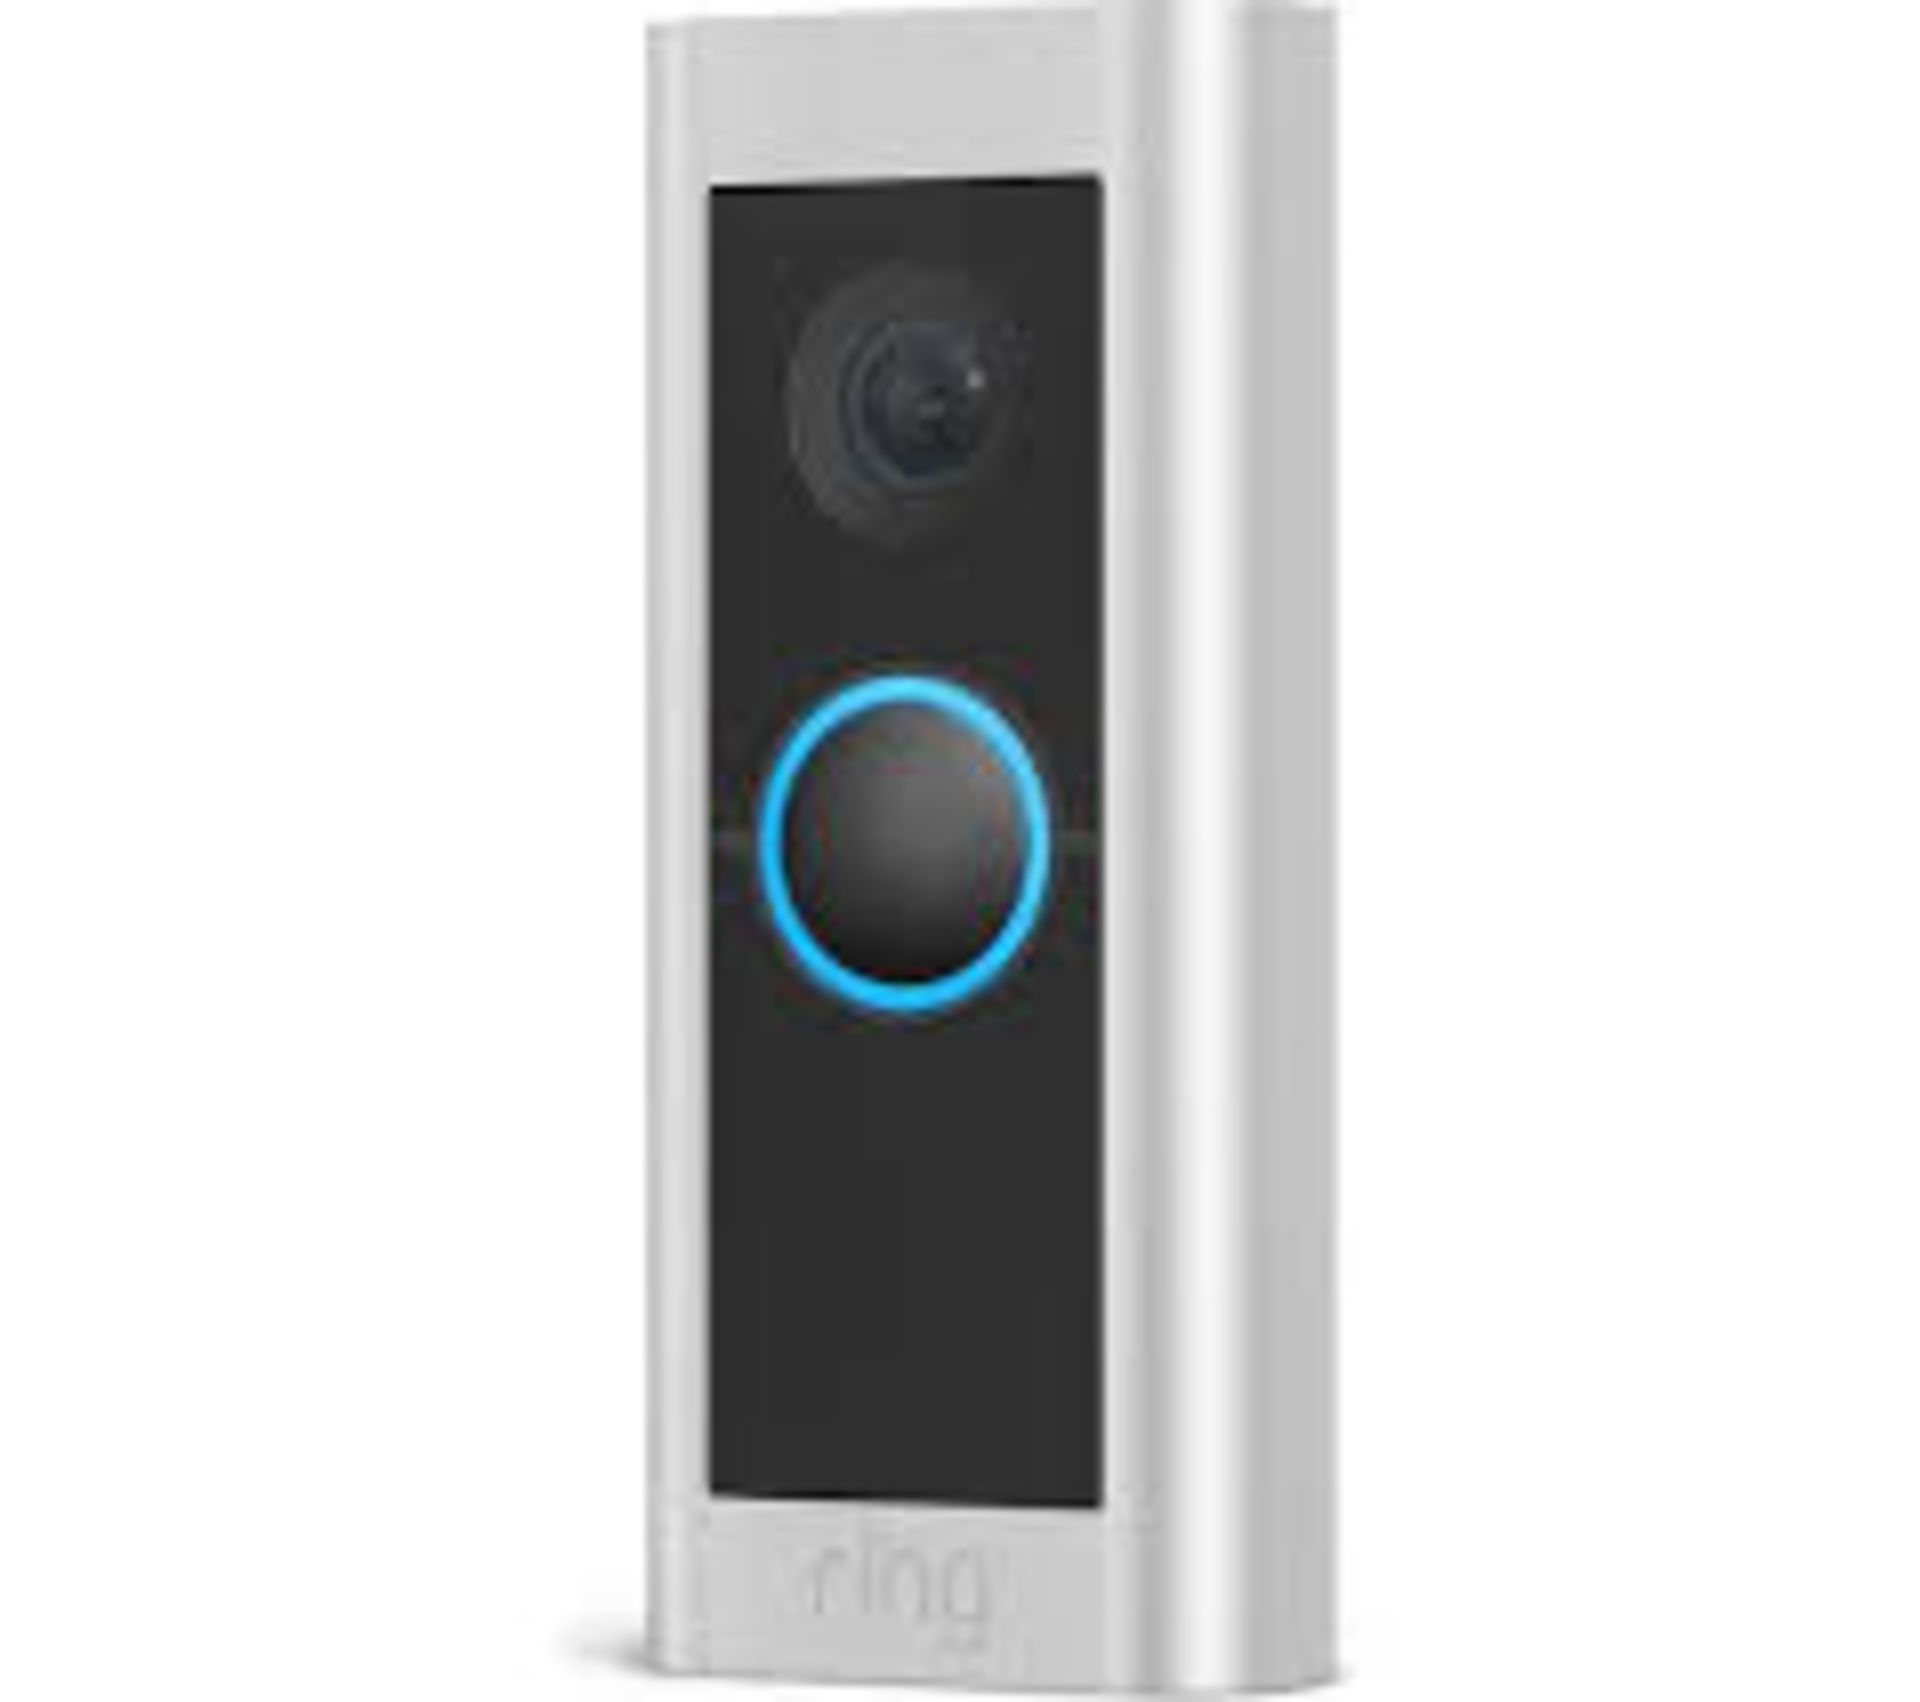 RING Video Doorbell Pro 2 . - S2.14. With the Ring Video Doorbell Pro 2, you'll always know who's at